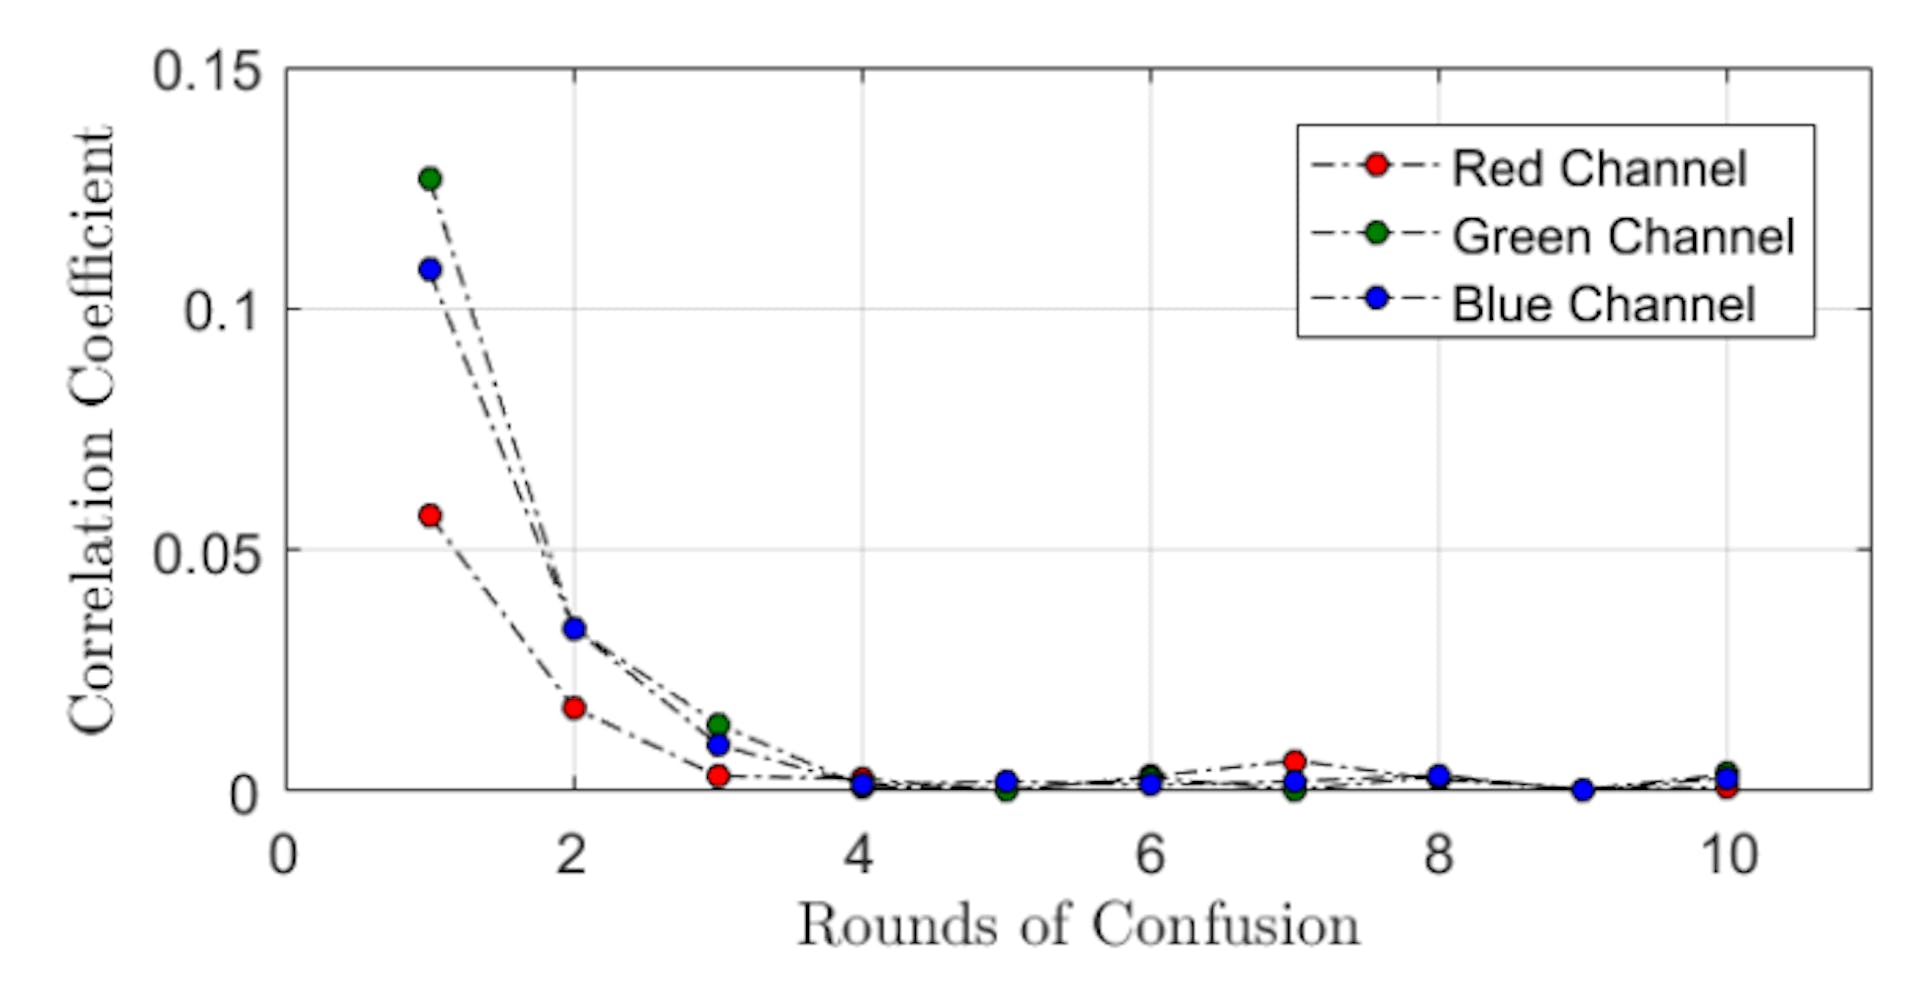 Figure 11: Correlation coefficient between the plain image and the images after different rounds of confusion operations.